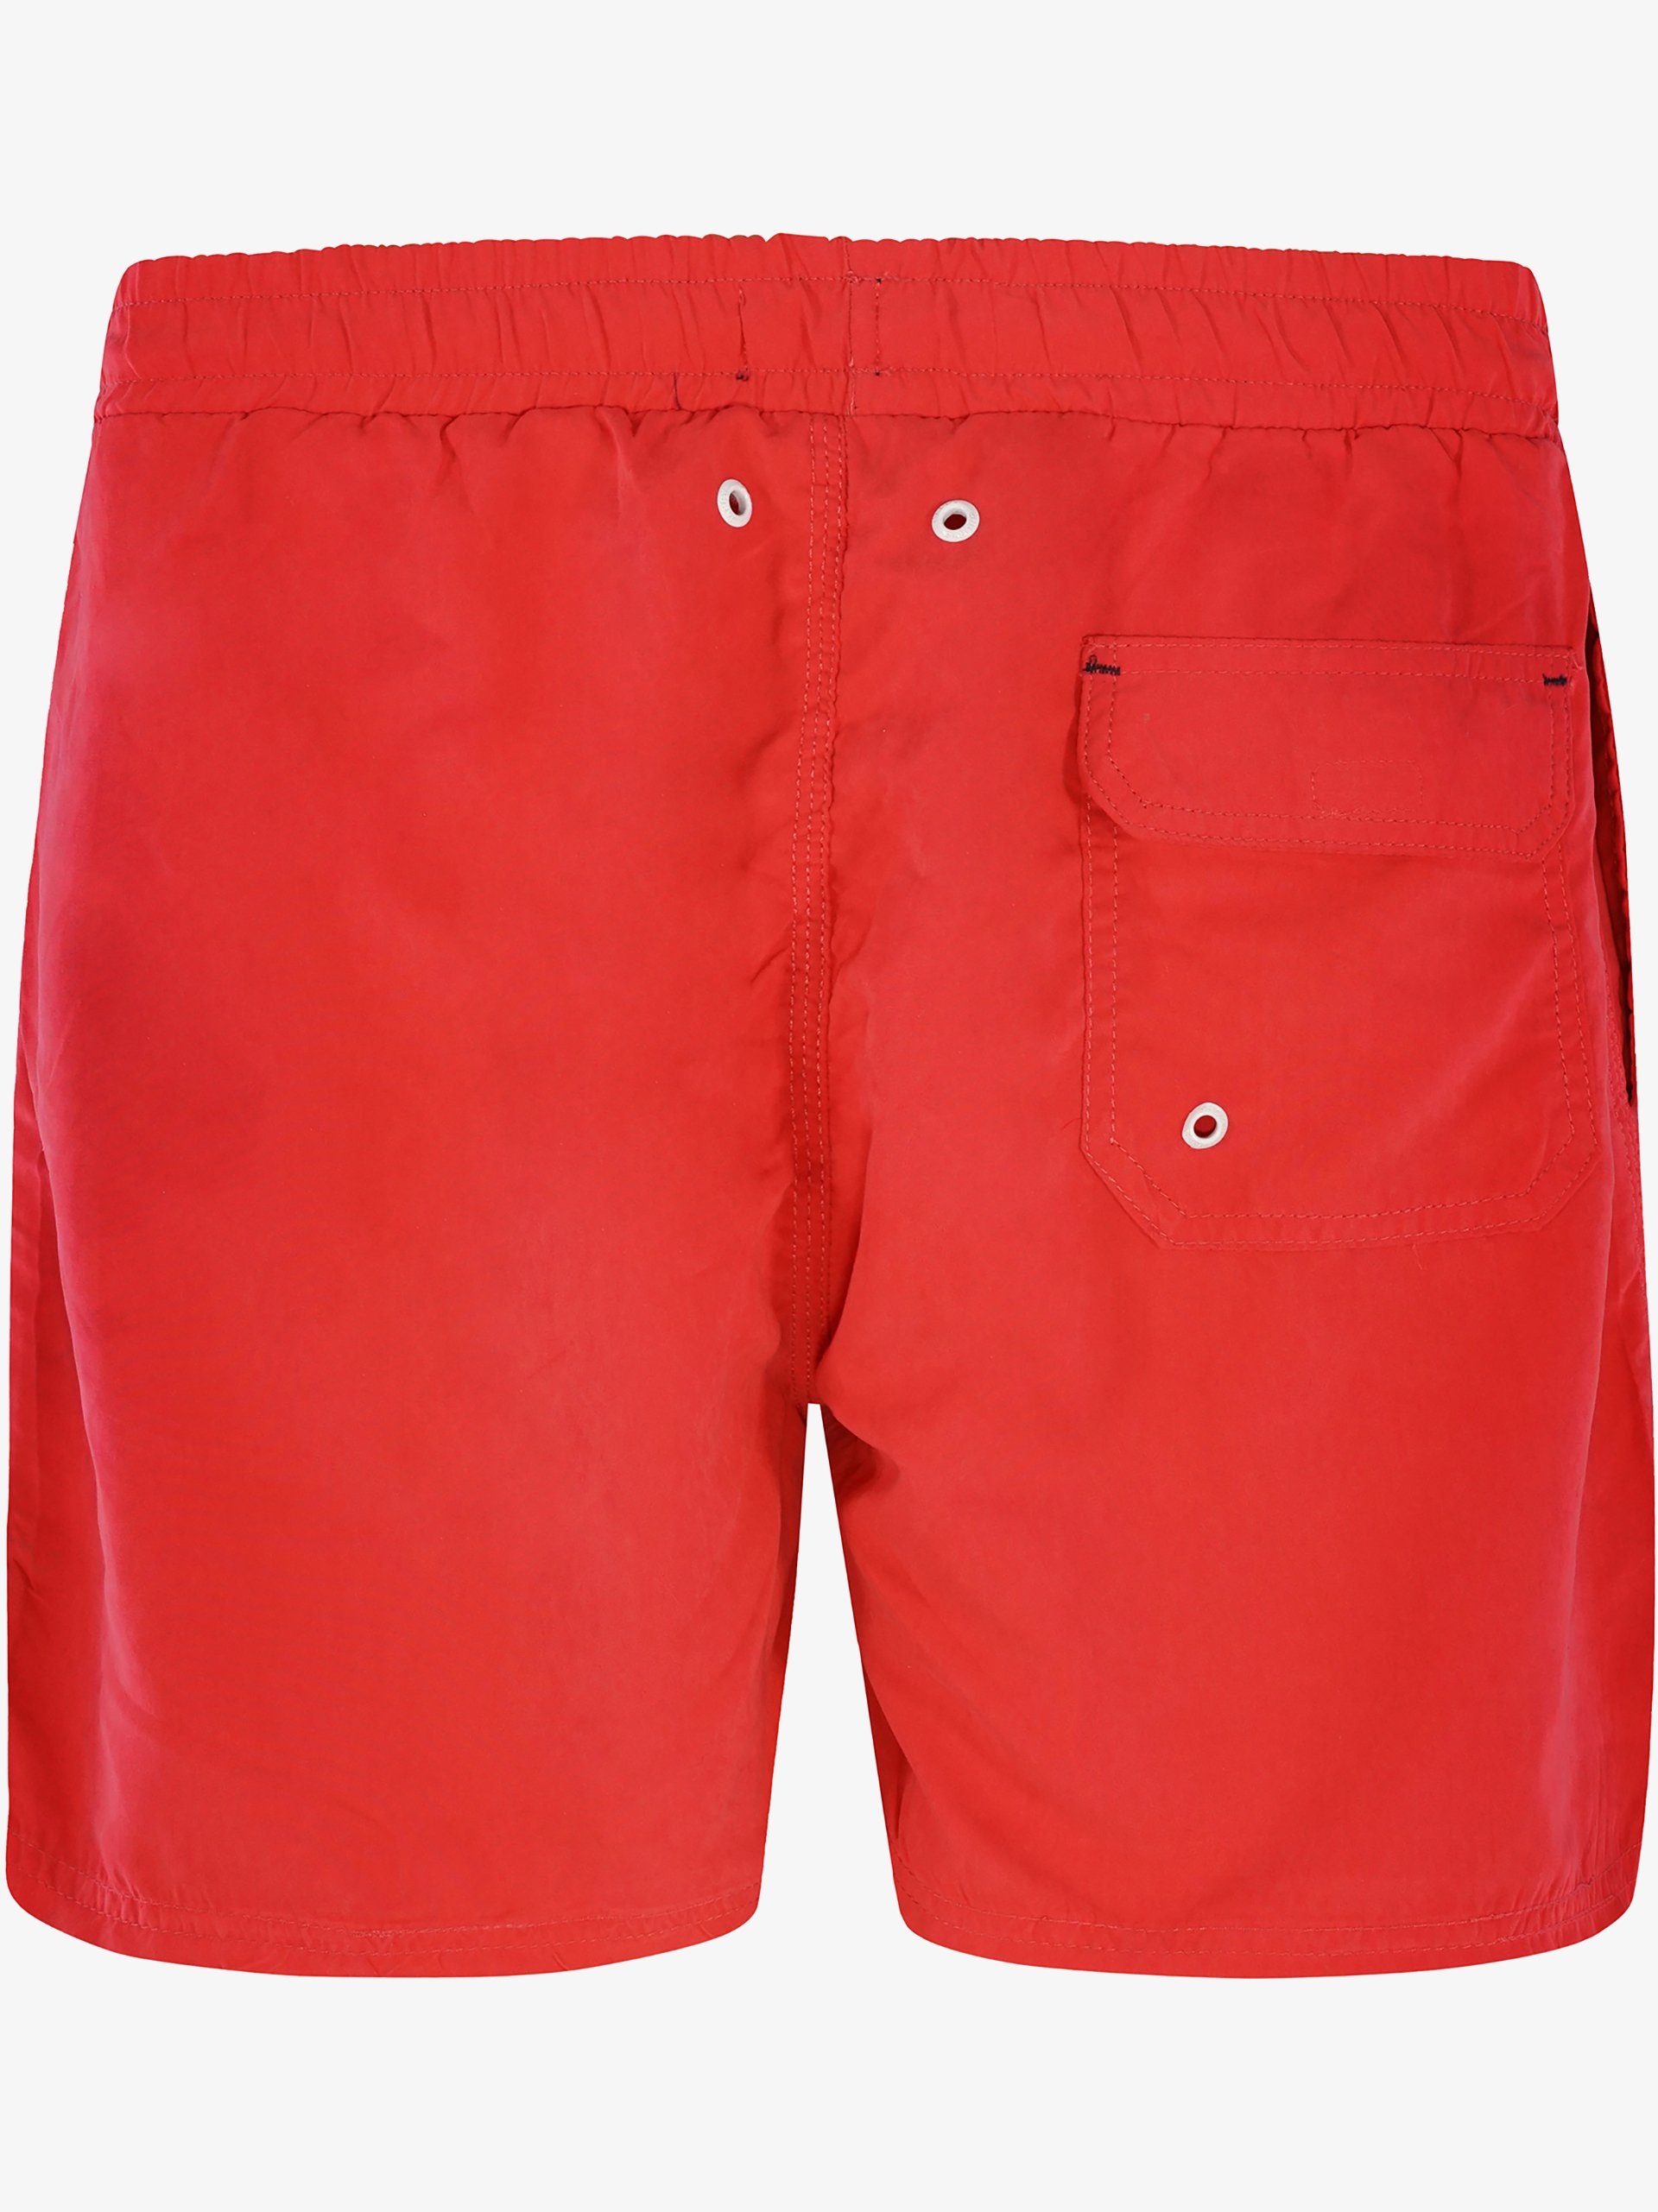 HAPPY Red SHORTS Badehose Simple